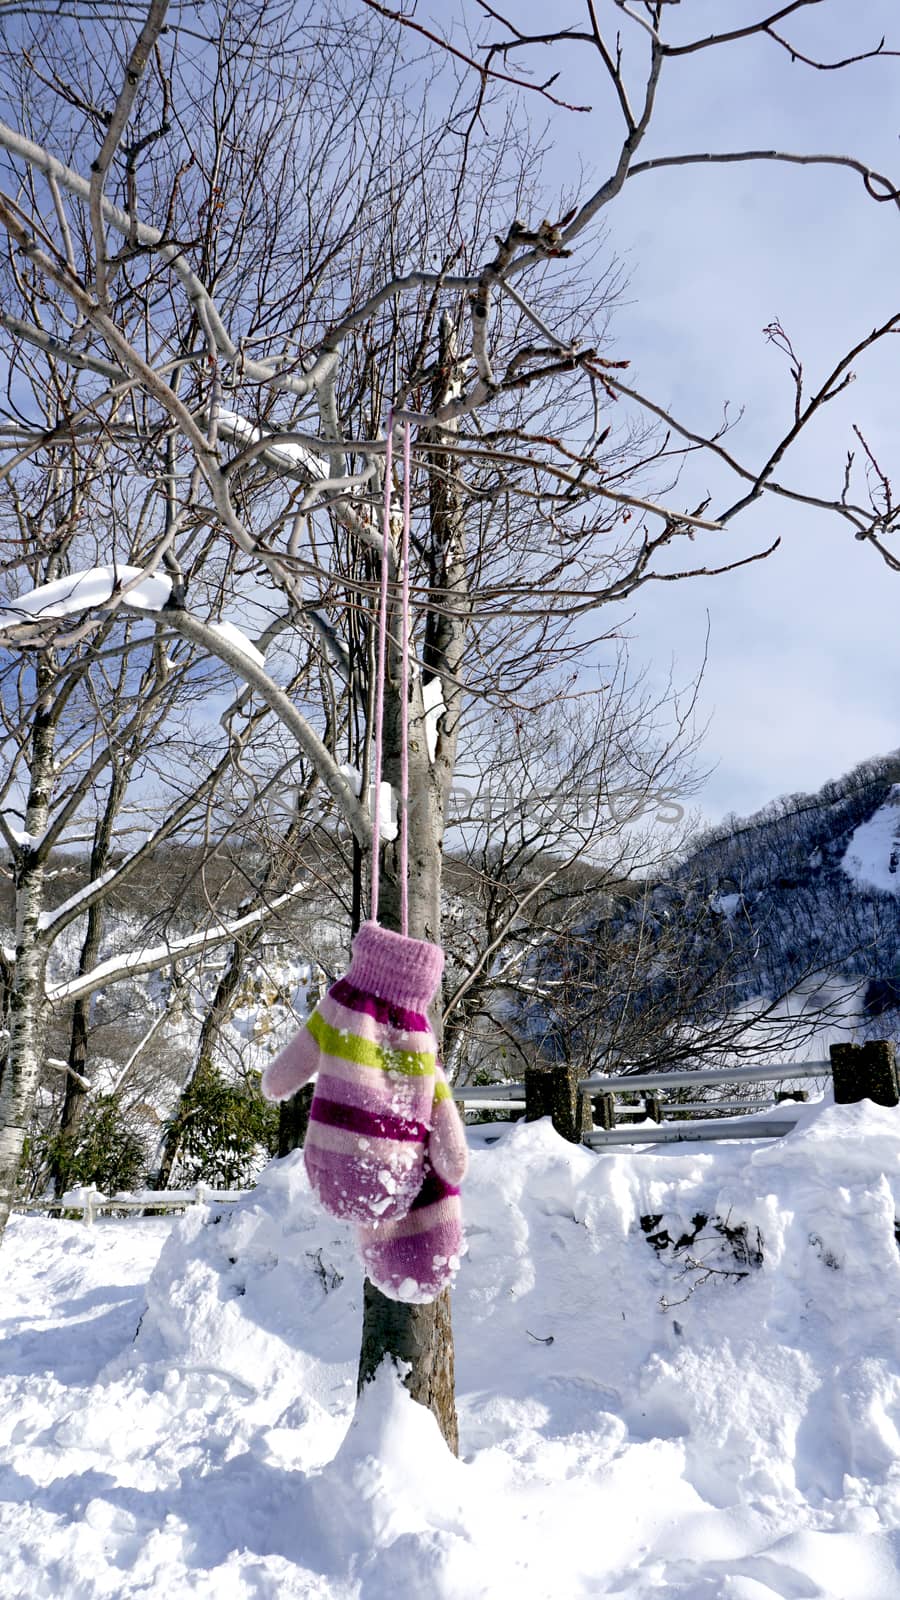 Snow gloves hanging with the tree in the forest Noboribetsu onse by polarbearstudio